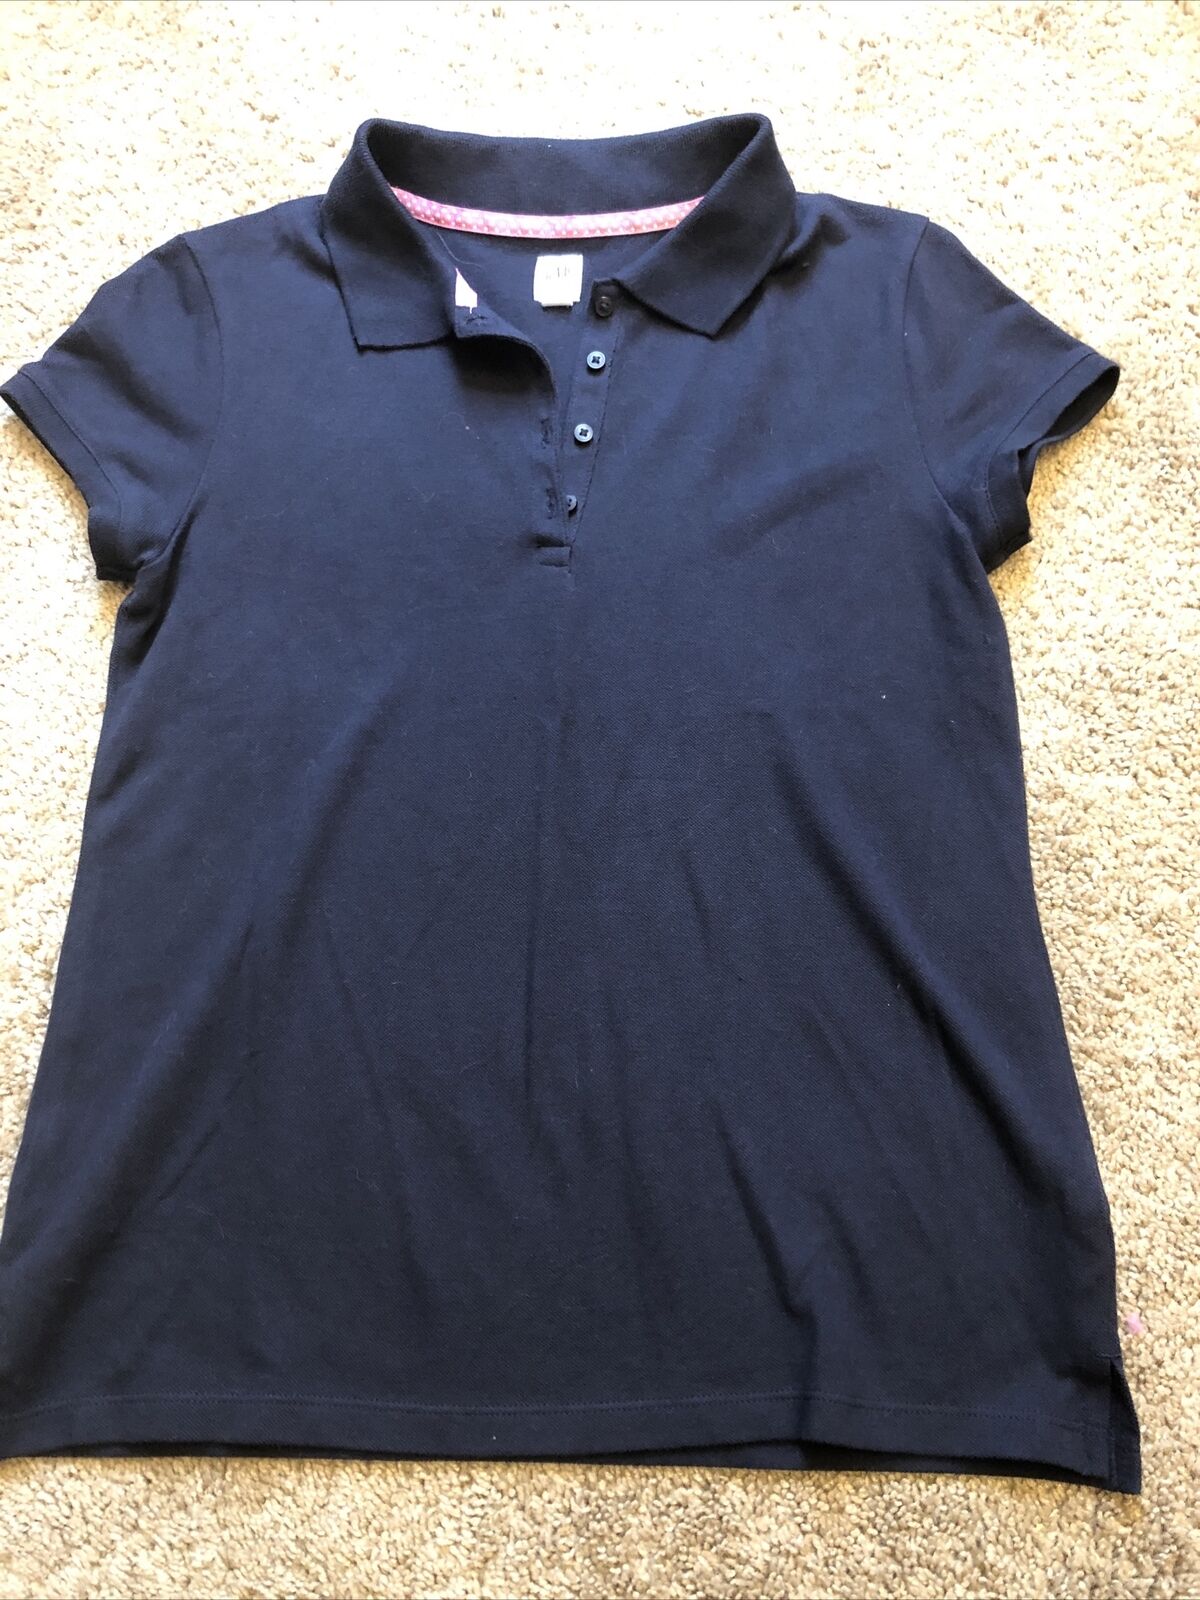 Gap Kids Girl's Navy Uniform Polo Baltimore Mall Short Limited price sale Size 14-16 sleeve Shirt